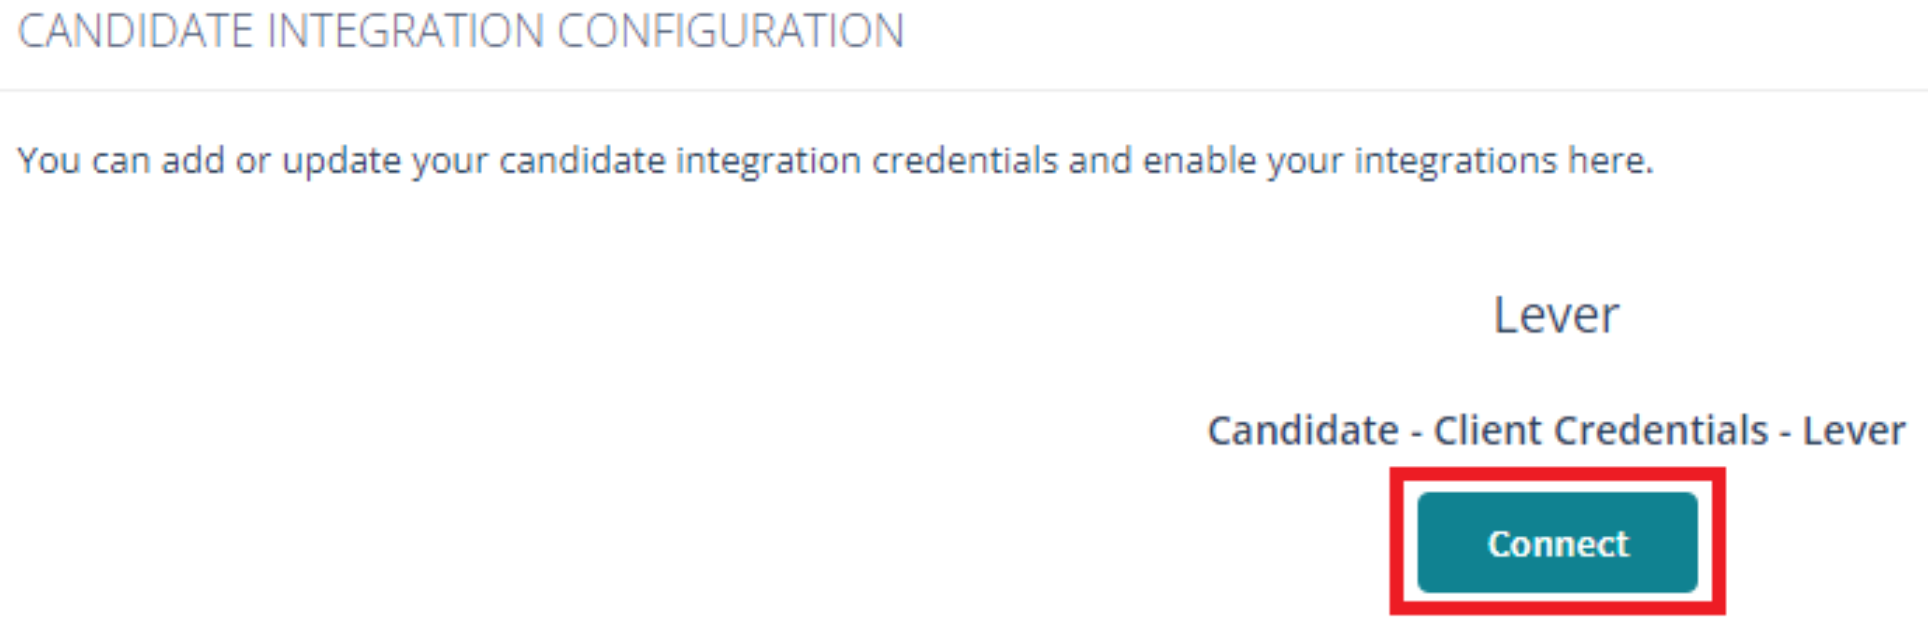 Connect button outlined on Candidate Integration Configuration page